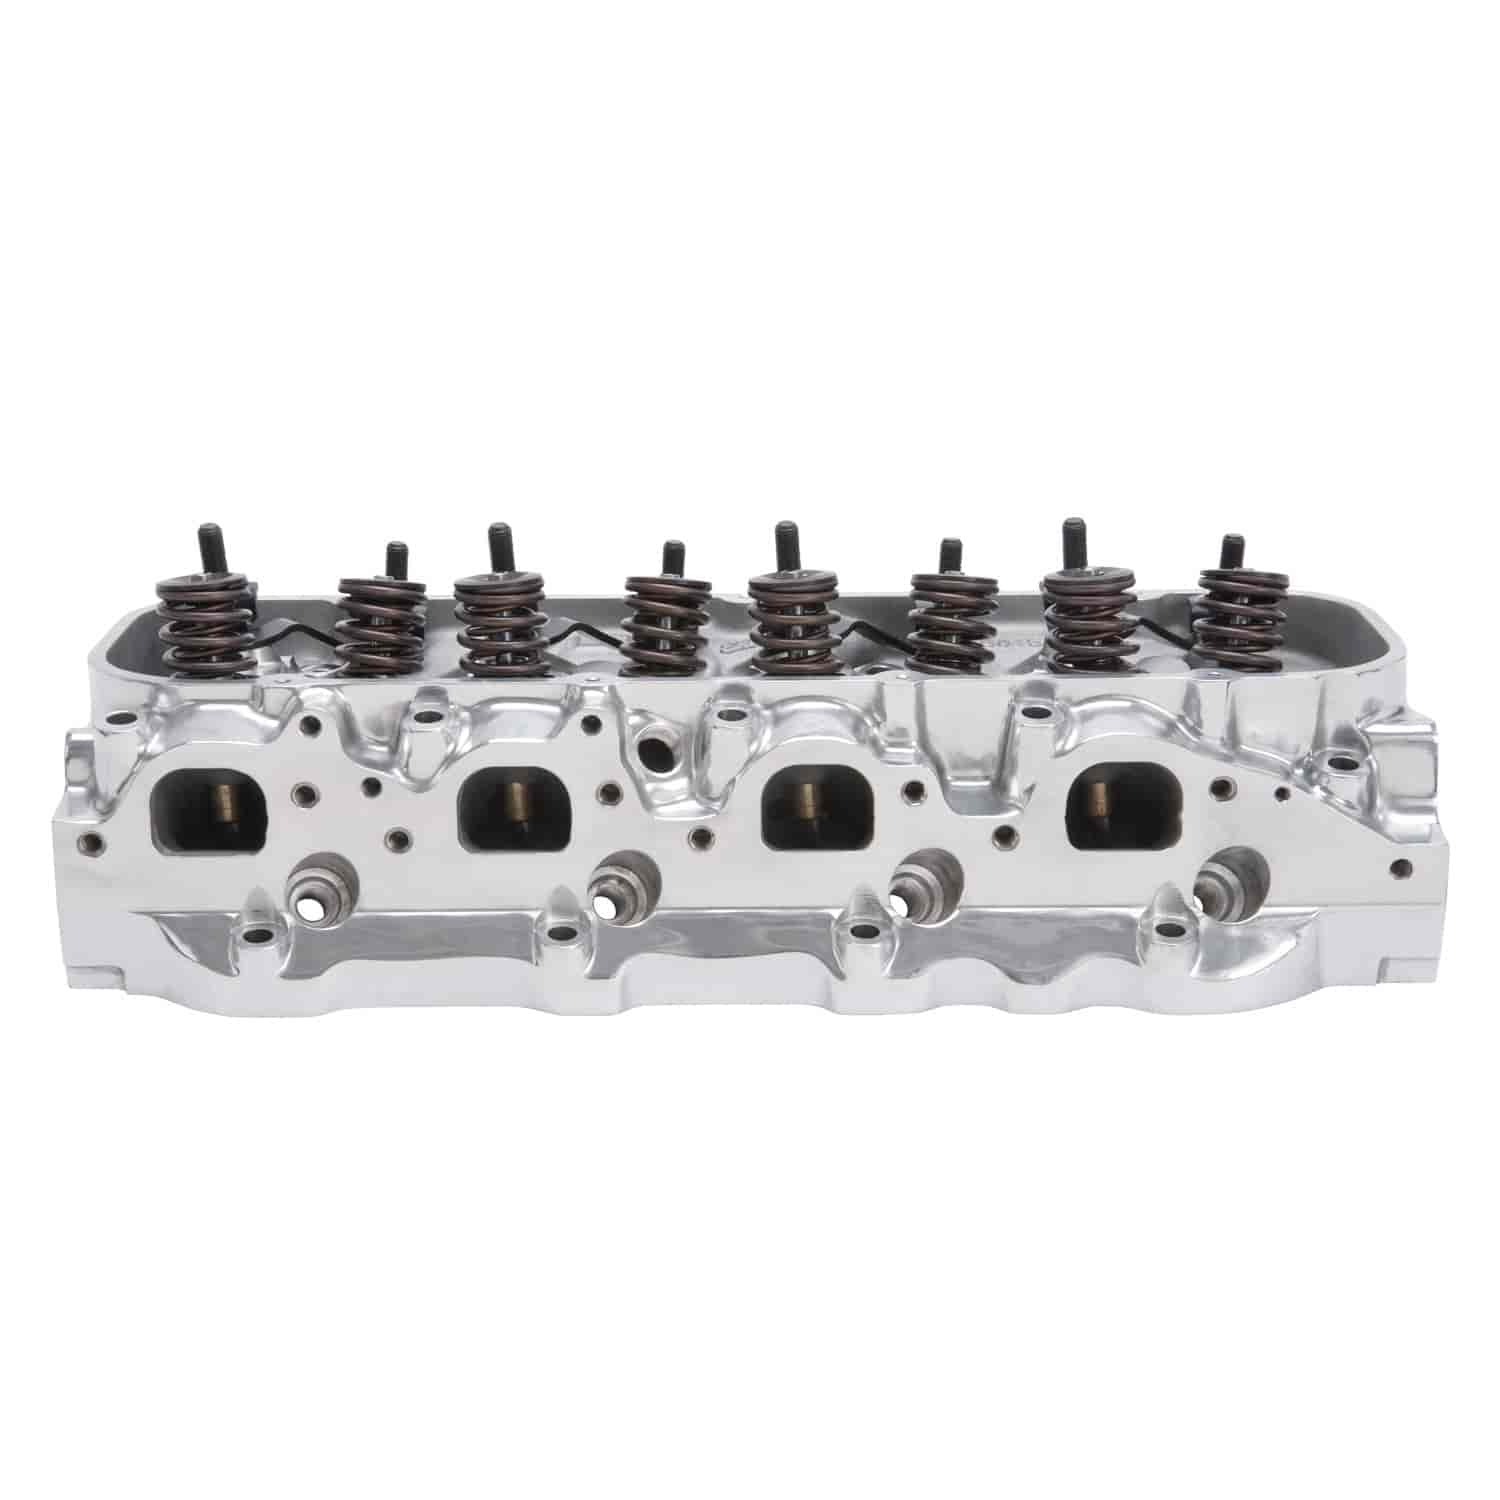 Performer High-Compression 454-O Oval Port Cylinder Head for Big Block Chevy